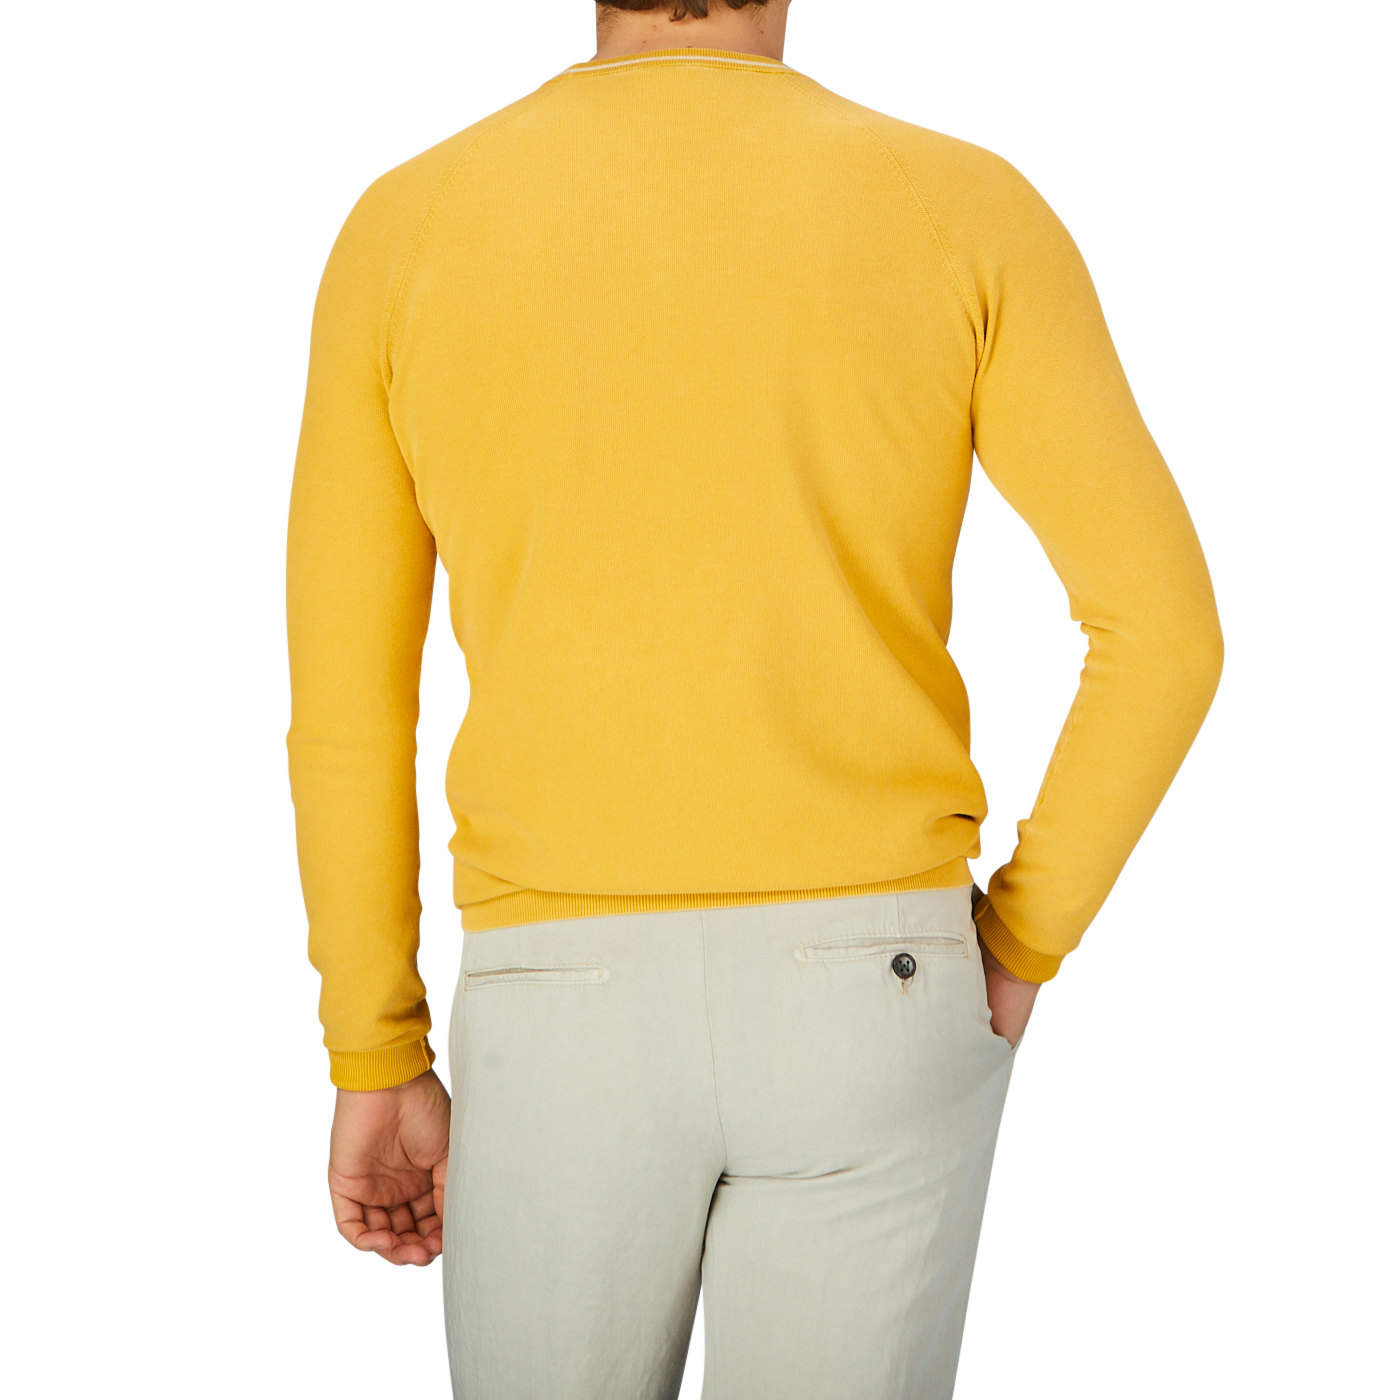 The back view of a man wearing a Aspesi Bright Yellow Cotton Piquet Crew Neck Sweater and khaki pants.